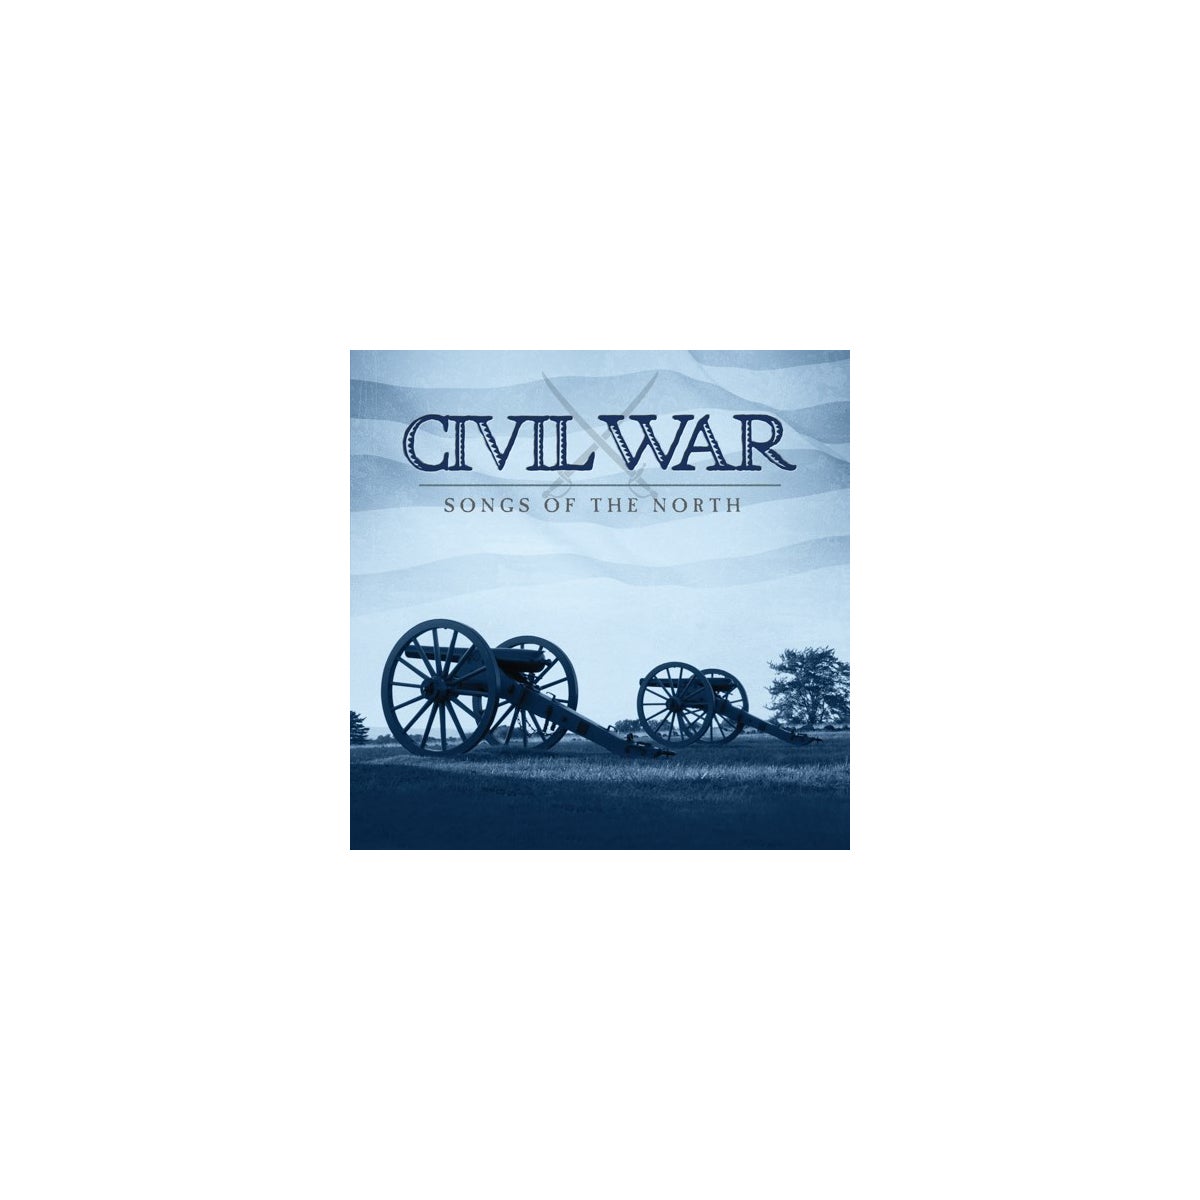 CIVIL WAR: SONGS OF THE NORTH